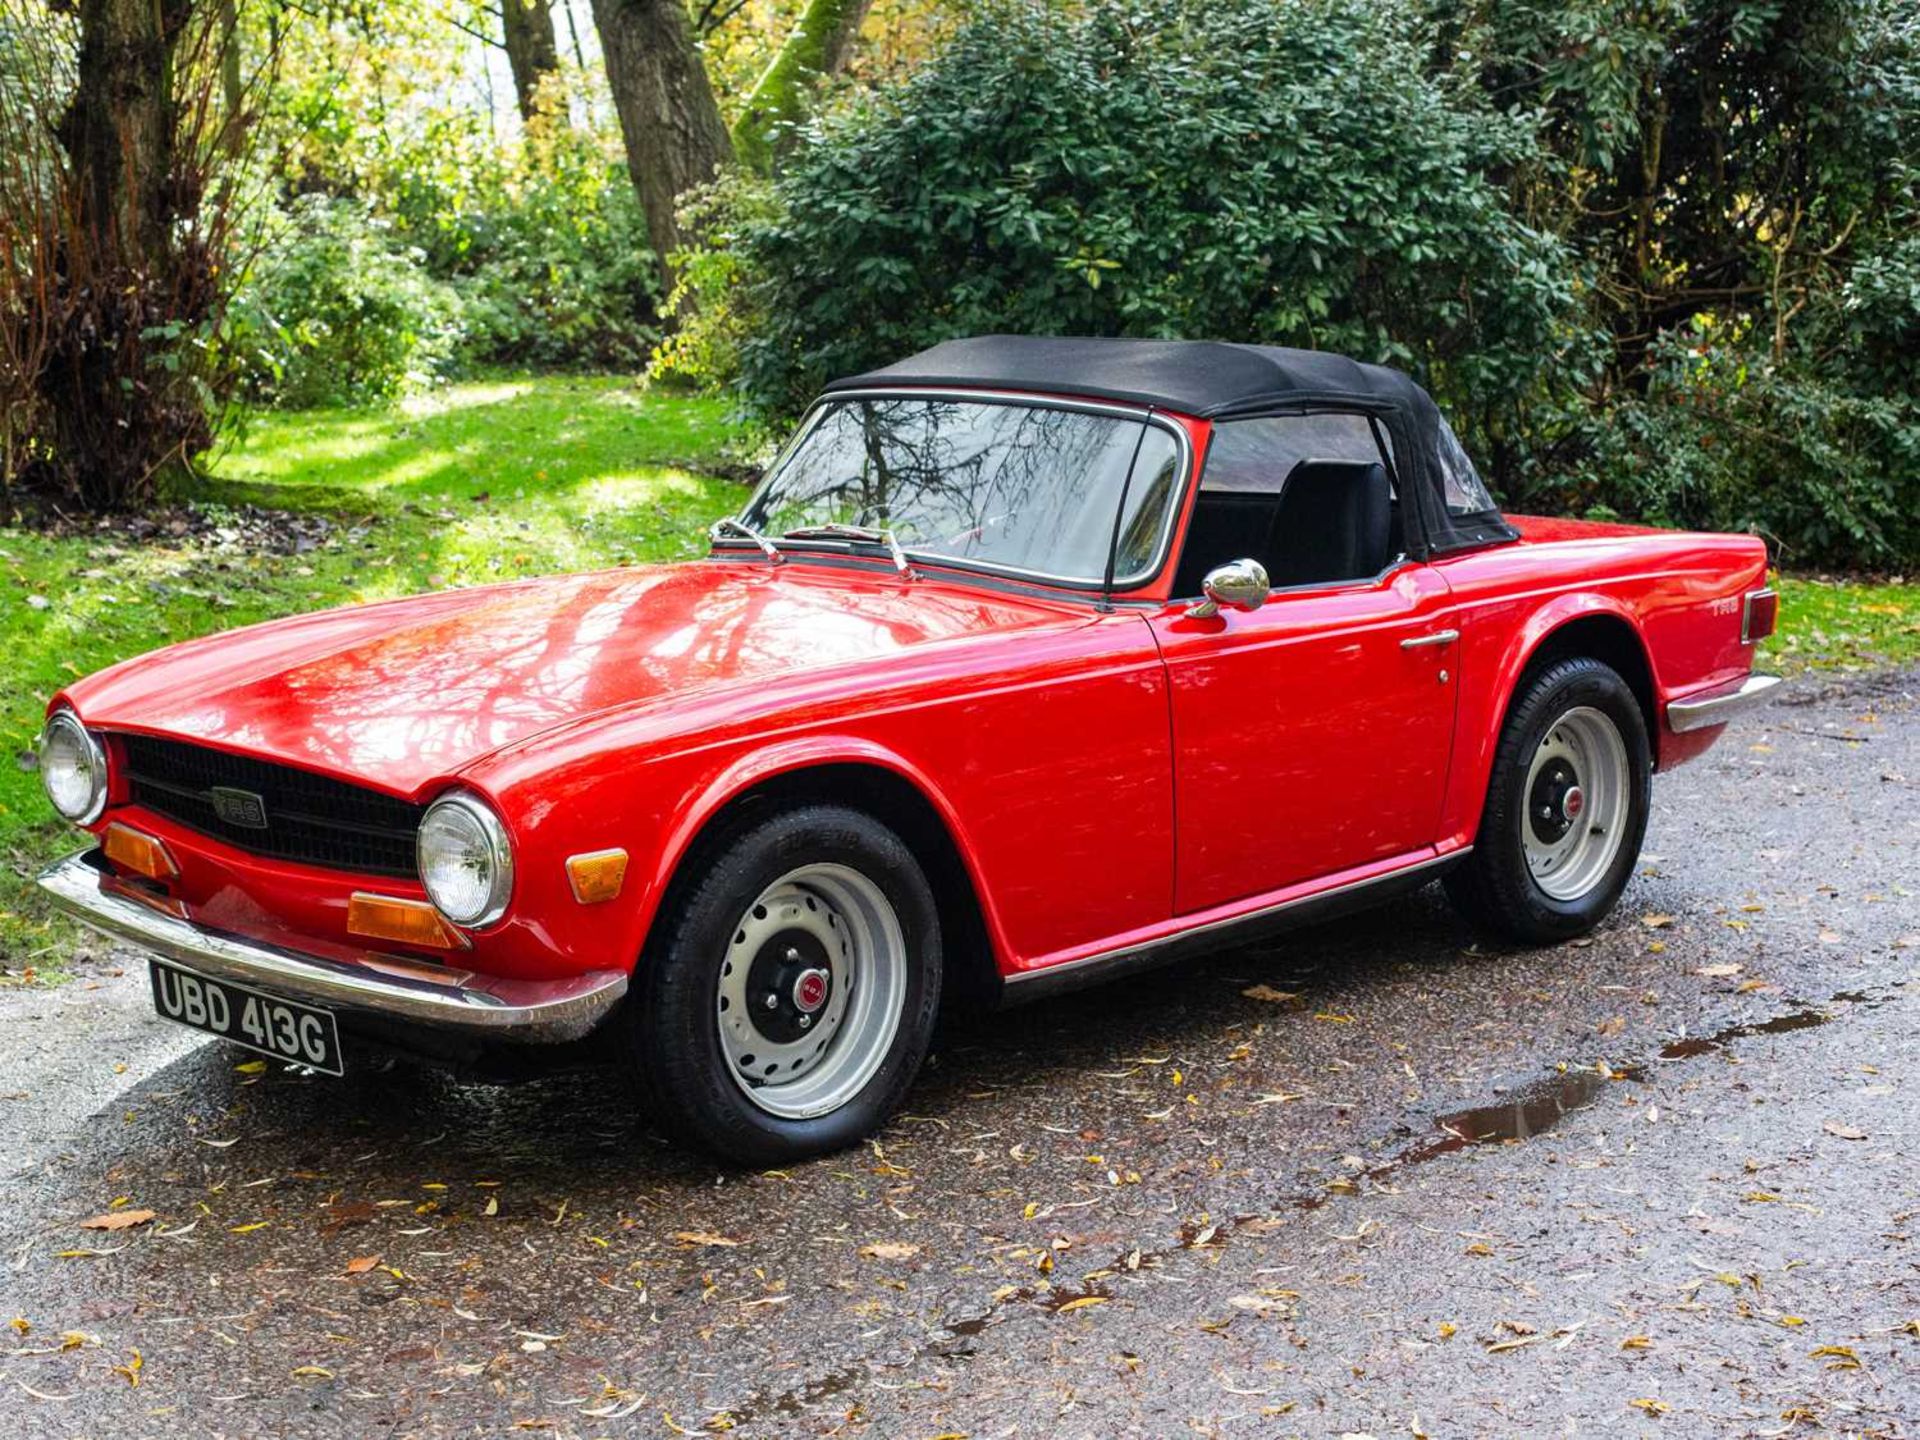 1969 Triumph TR6 Repatriated in 2020, converted to RHD and equipped with UK-specification SU carbure - Image 5 of 53